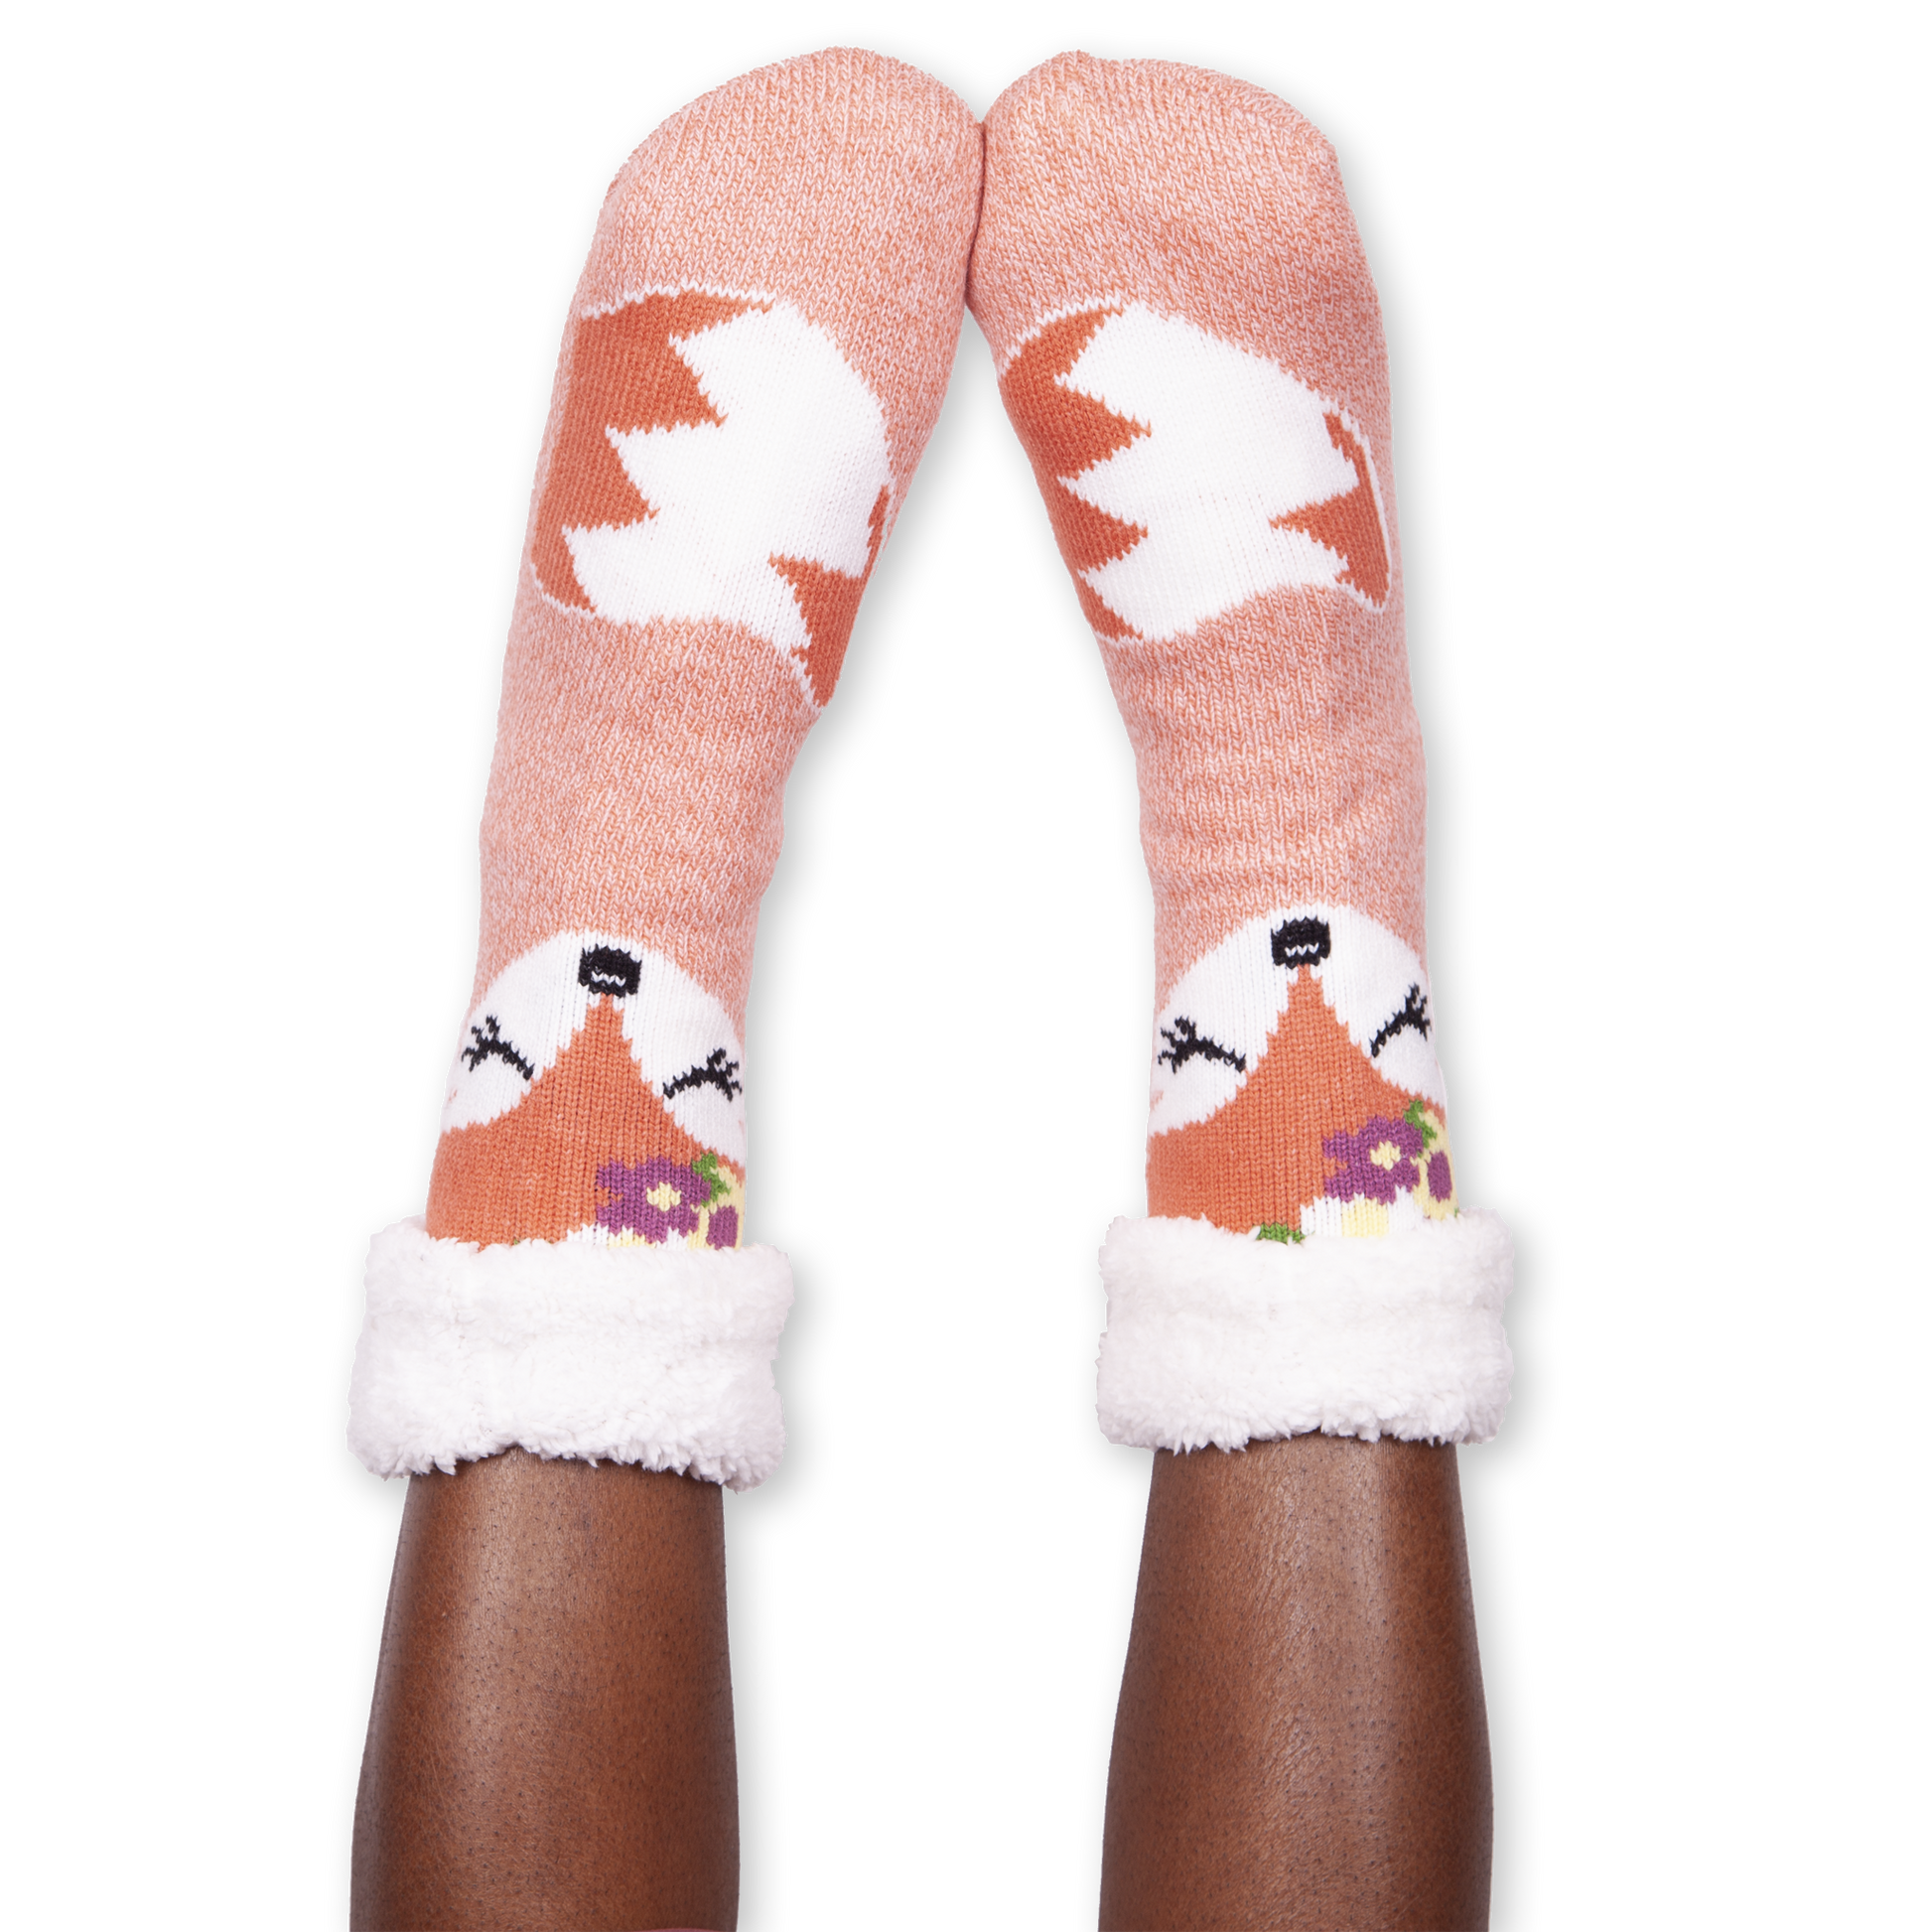 Long Cozy Slipper Socks with Grippers and Sherpa Lining, Women